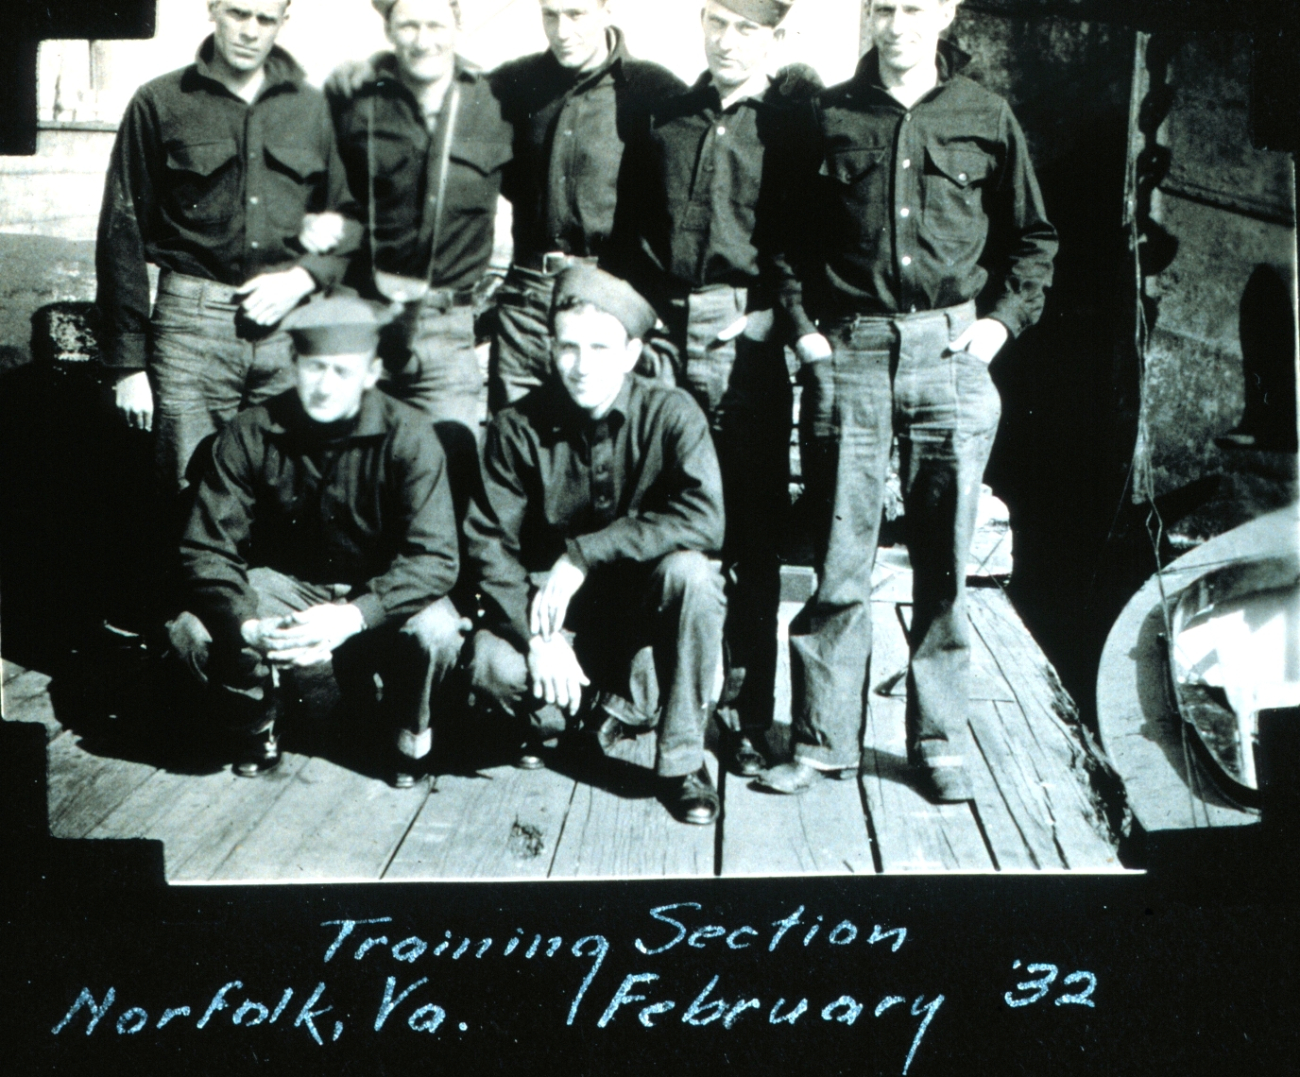 Deck officers in training for a commission in the United States Coast andGeodetic Survey, 1932